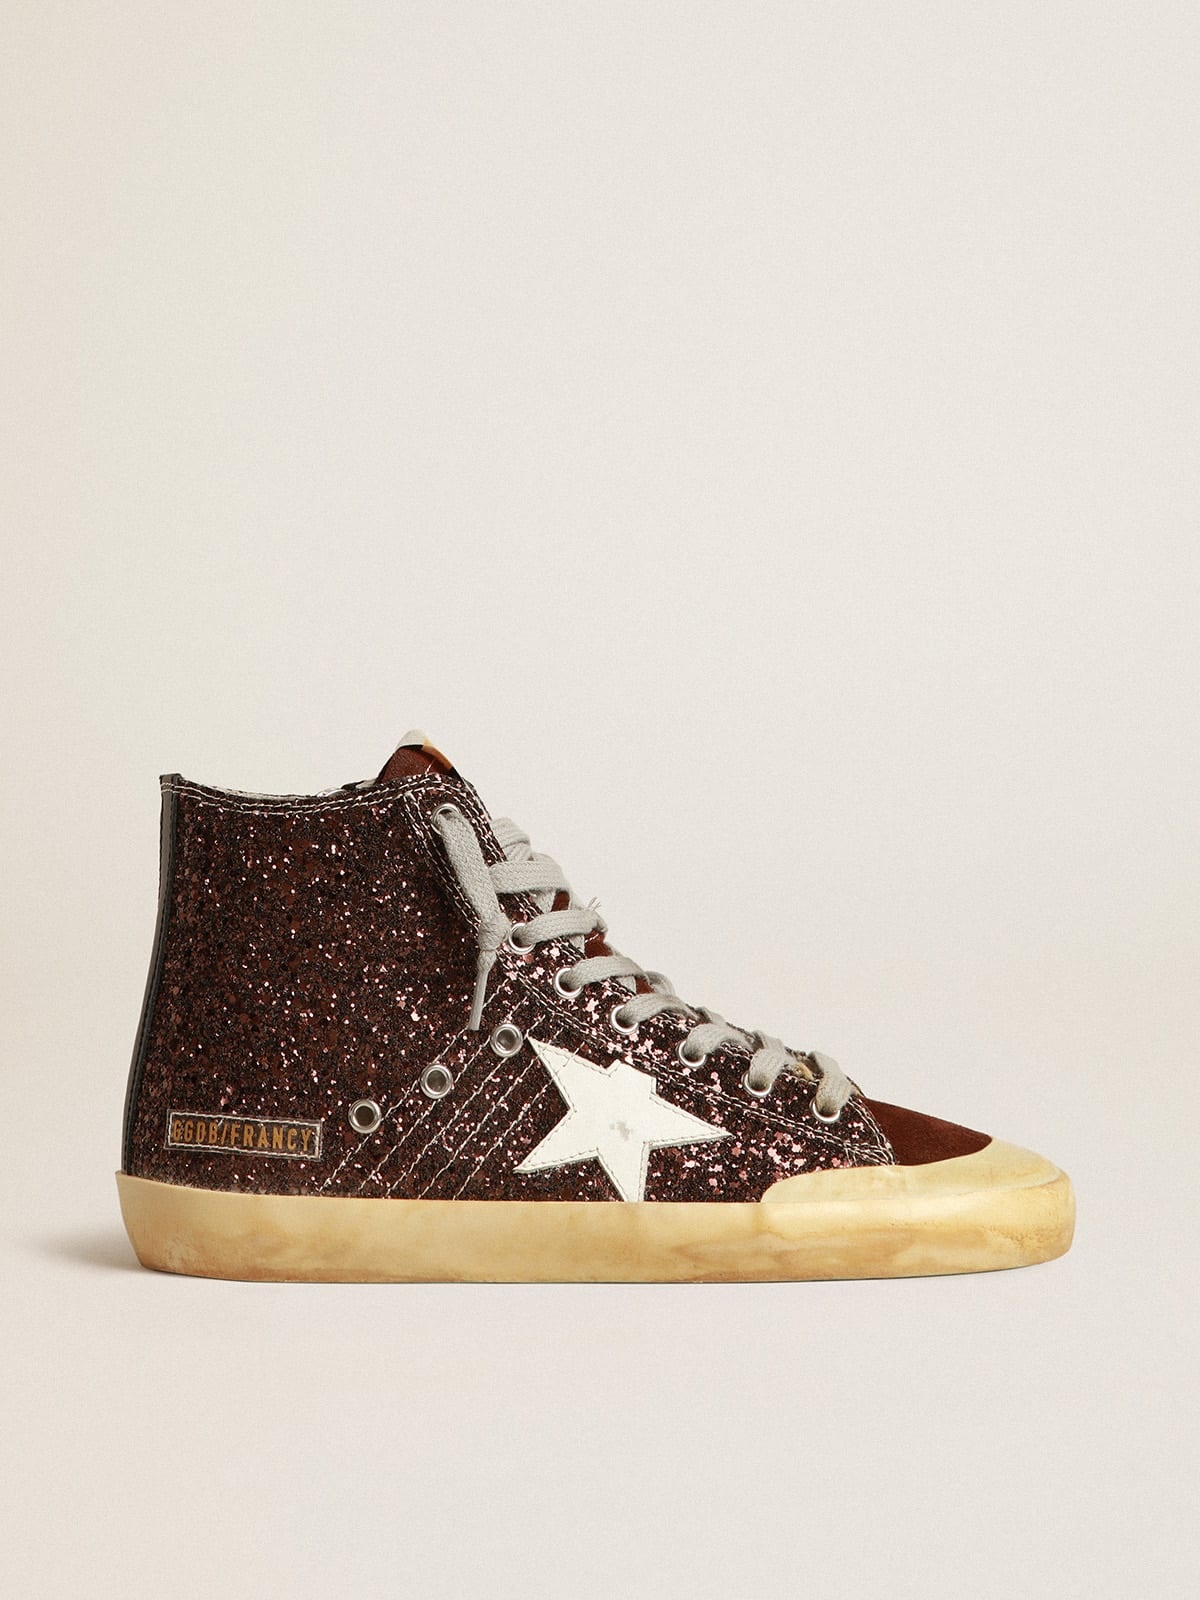 Golden Goose Francy Penstar in brown glitter with white leather star |  goldengoose | REVERSIBLE